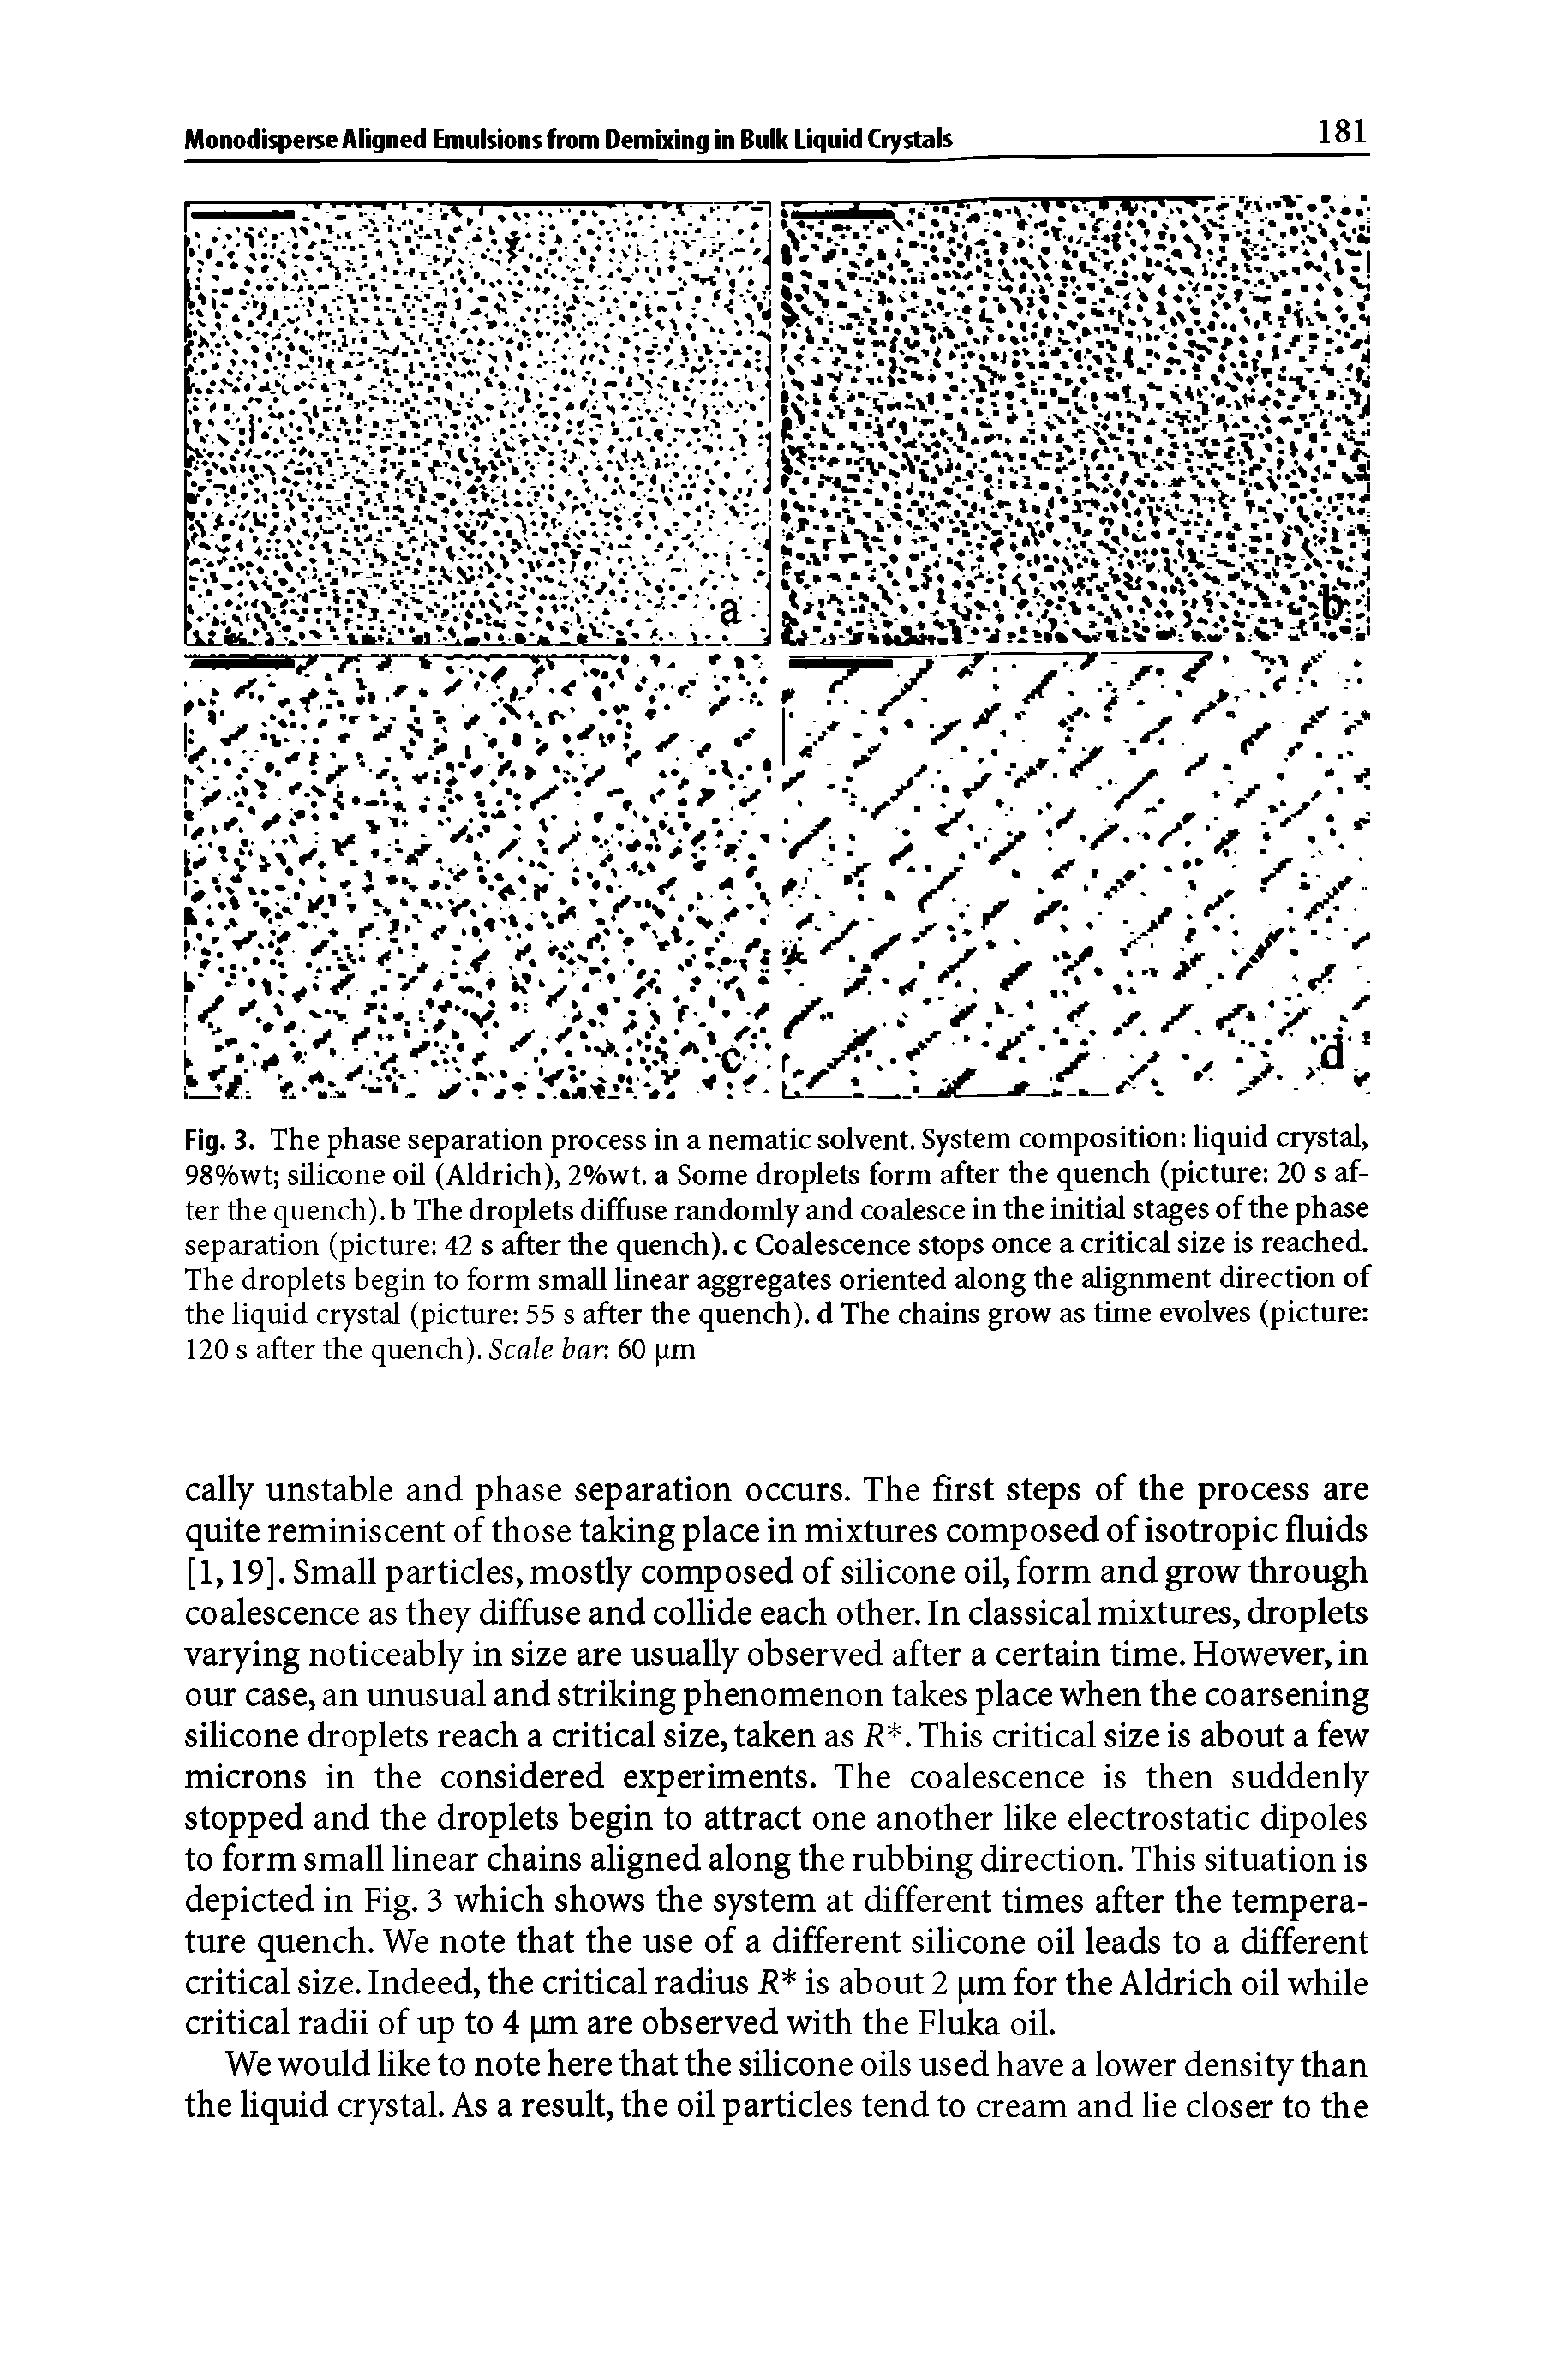 Fig. 3. The phase separation process in a nematic solvent. System composition liquid crystal, 98%wt silicone oil (Aldrich), 2%wt. a Some droplets form after the quench (picture 20 s after the quench), b The droplets diffuse randomly and coalesce in the initial stages of the phase separation (picture 42 s after the quench), c Coalescence stops once a critical size is reached. The droplets begin to form small linear aggregates oriented along the alignment direction of the liquid crystal (picture 55 s after the quench), d The chains grow as time evolves (picture 120 s after the quench). Scale bar 60 im...